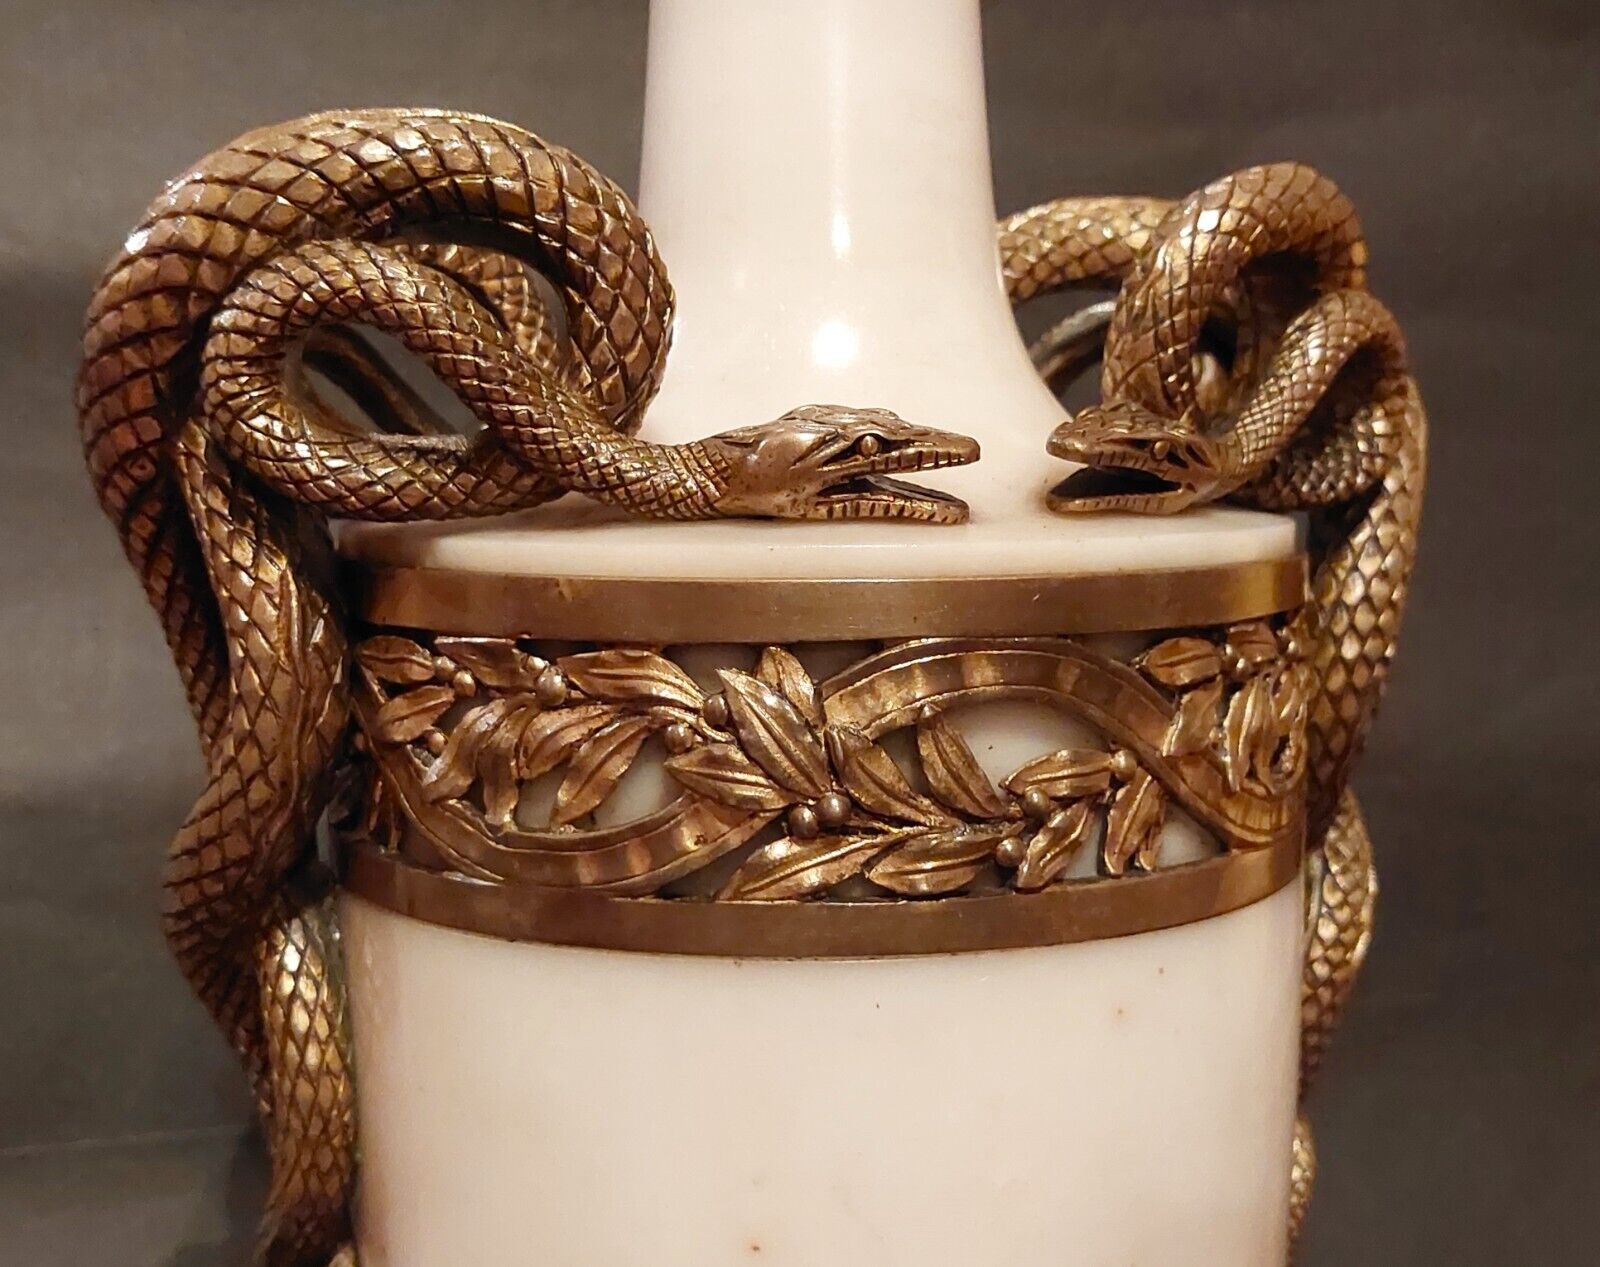 ANTIQUE 1880 EXCEPTIONAL BEST SNAKE LAMP MARBLE URN GILT BRONZE FIGURAL FRENCH